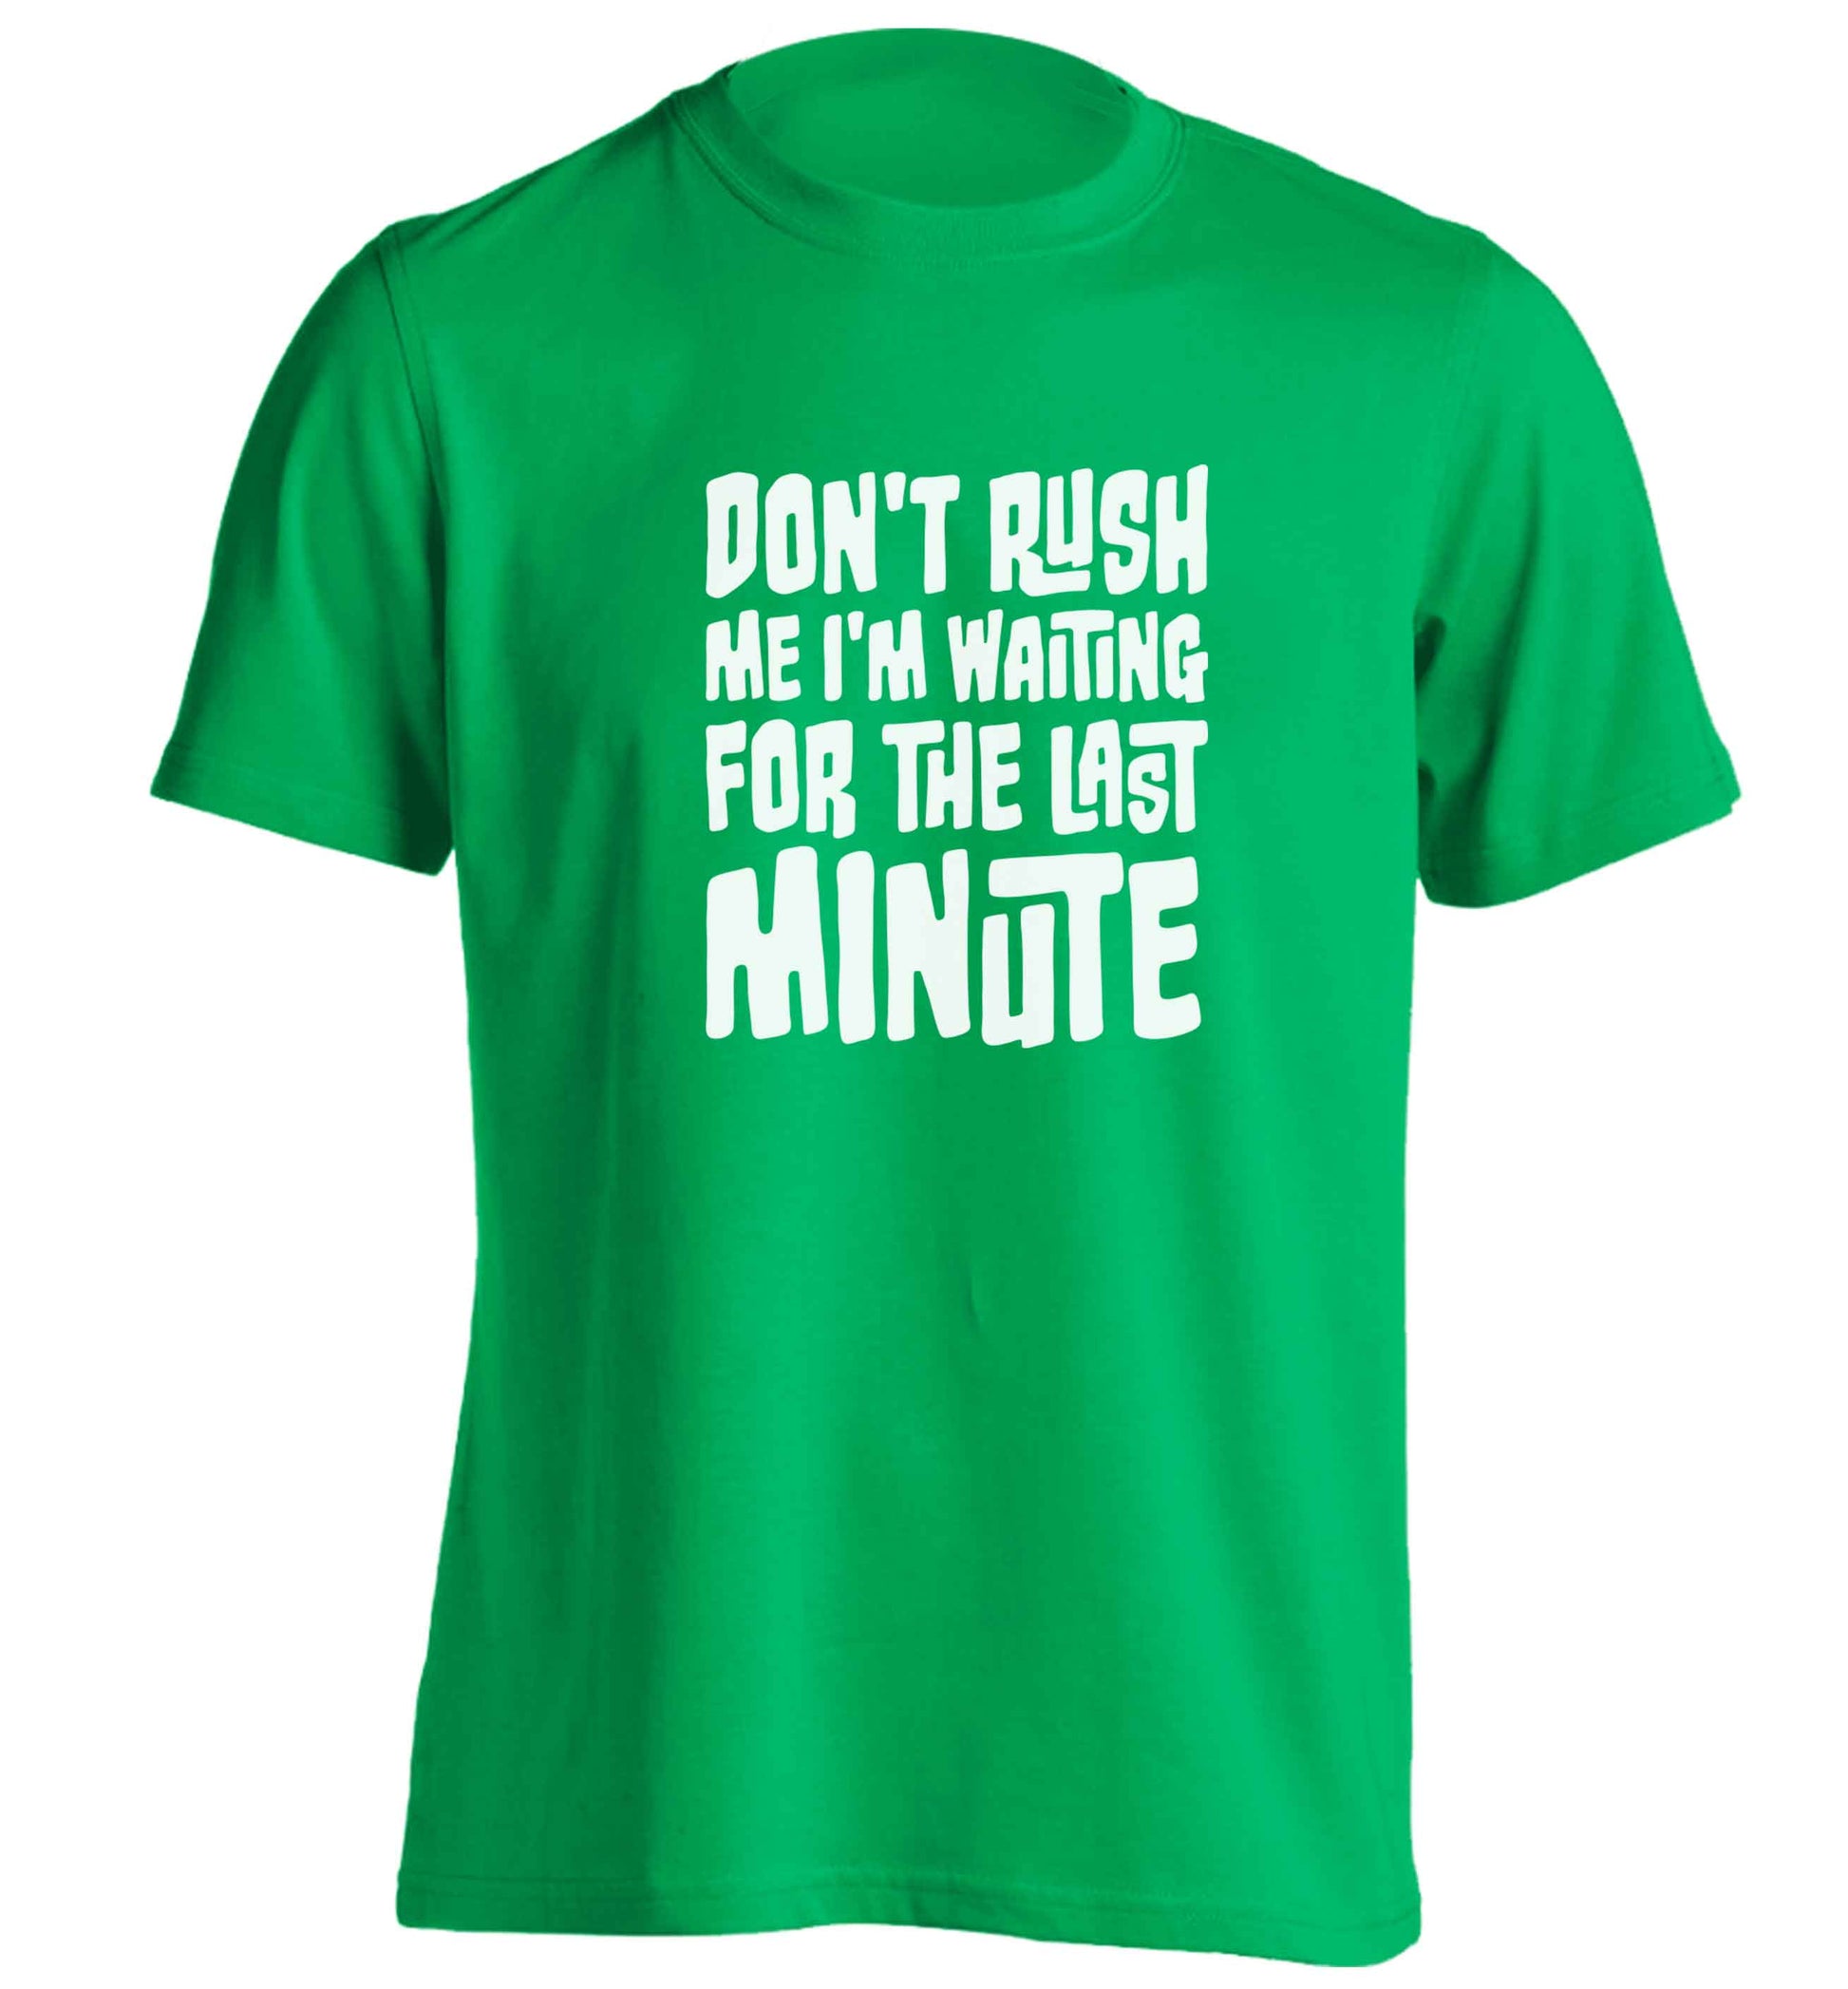 Don't rush me I'm waiting for the last minute adults unisex green Tshirt 2XL